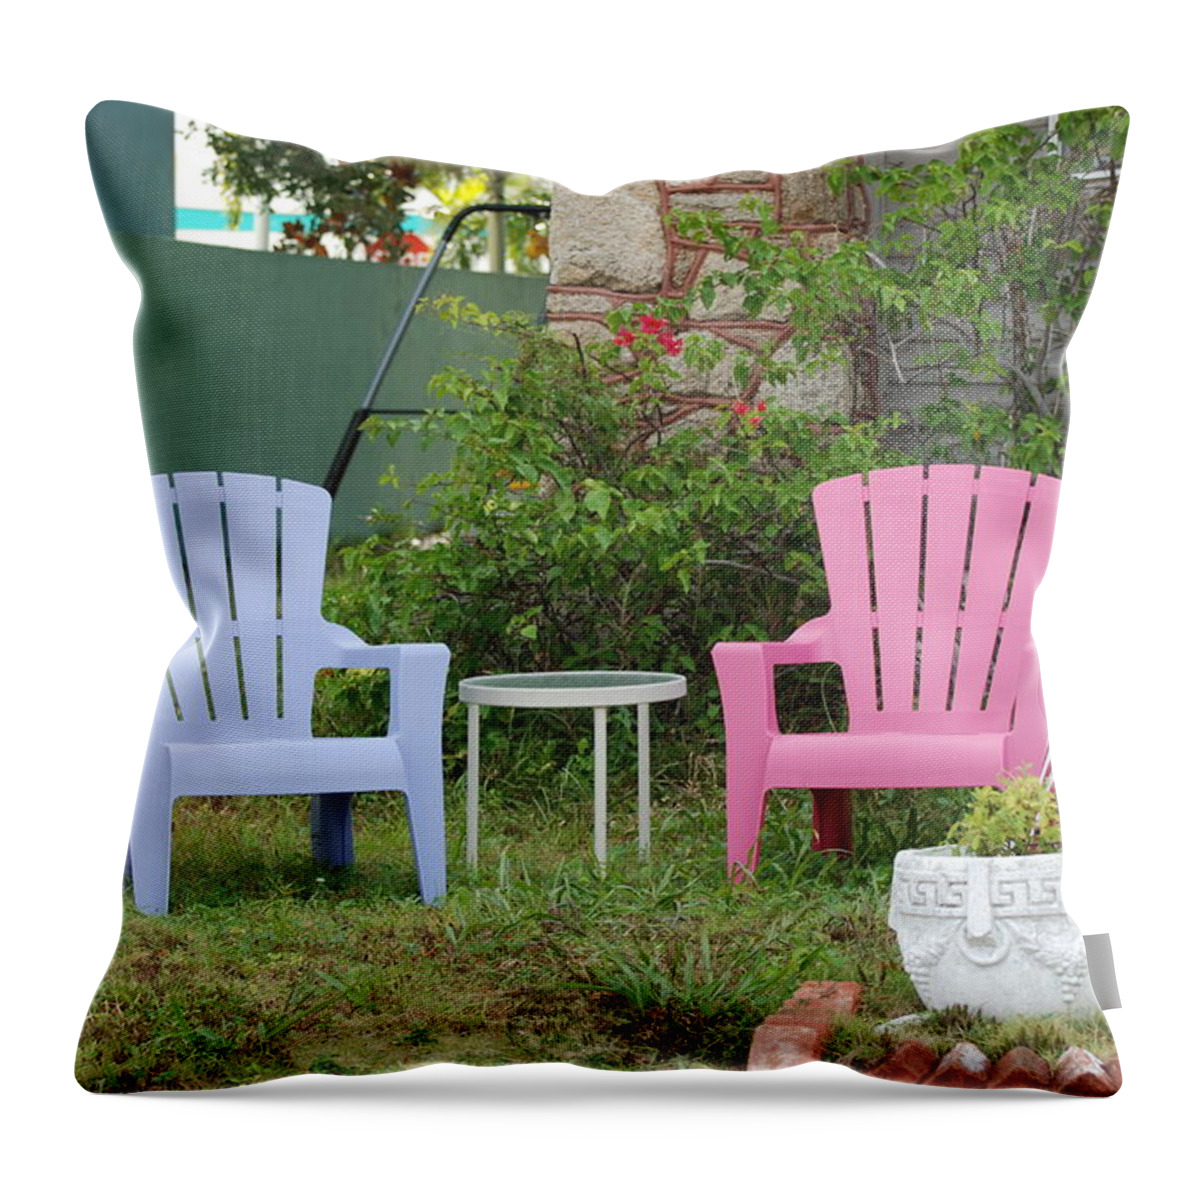 Art Deco Throw Pillow featuring the photograph Have A Seat by Rob Hans